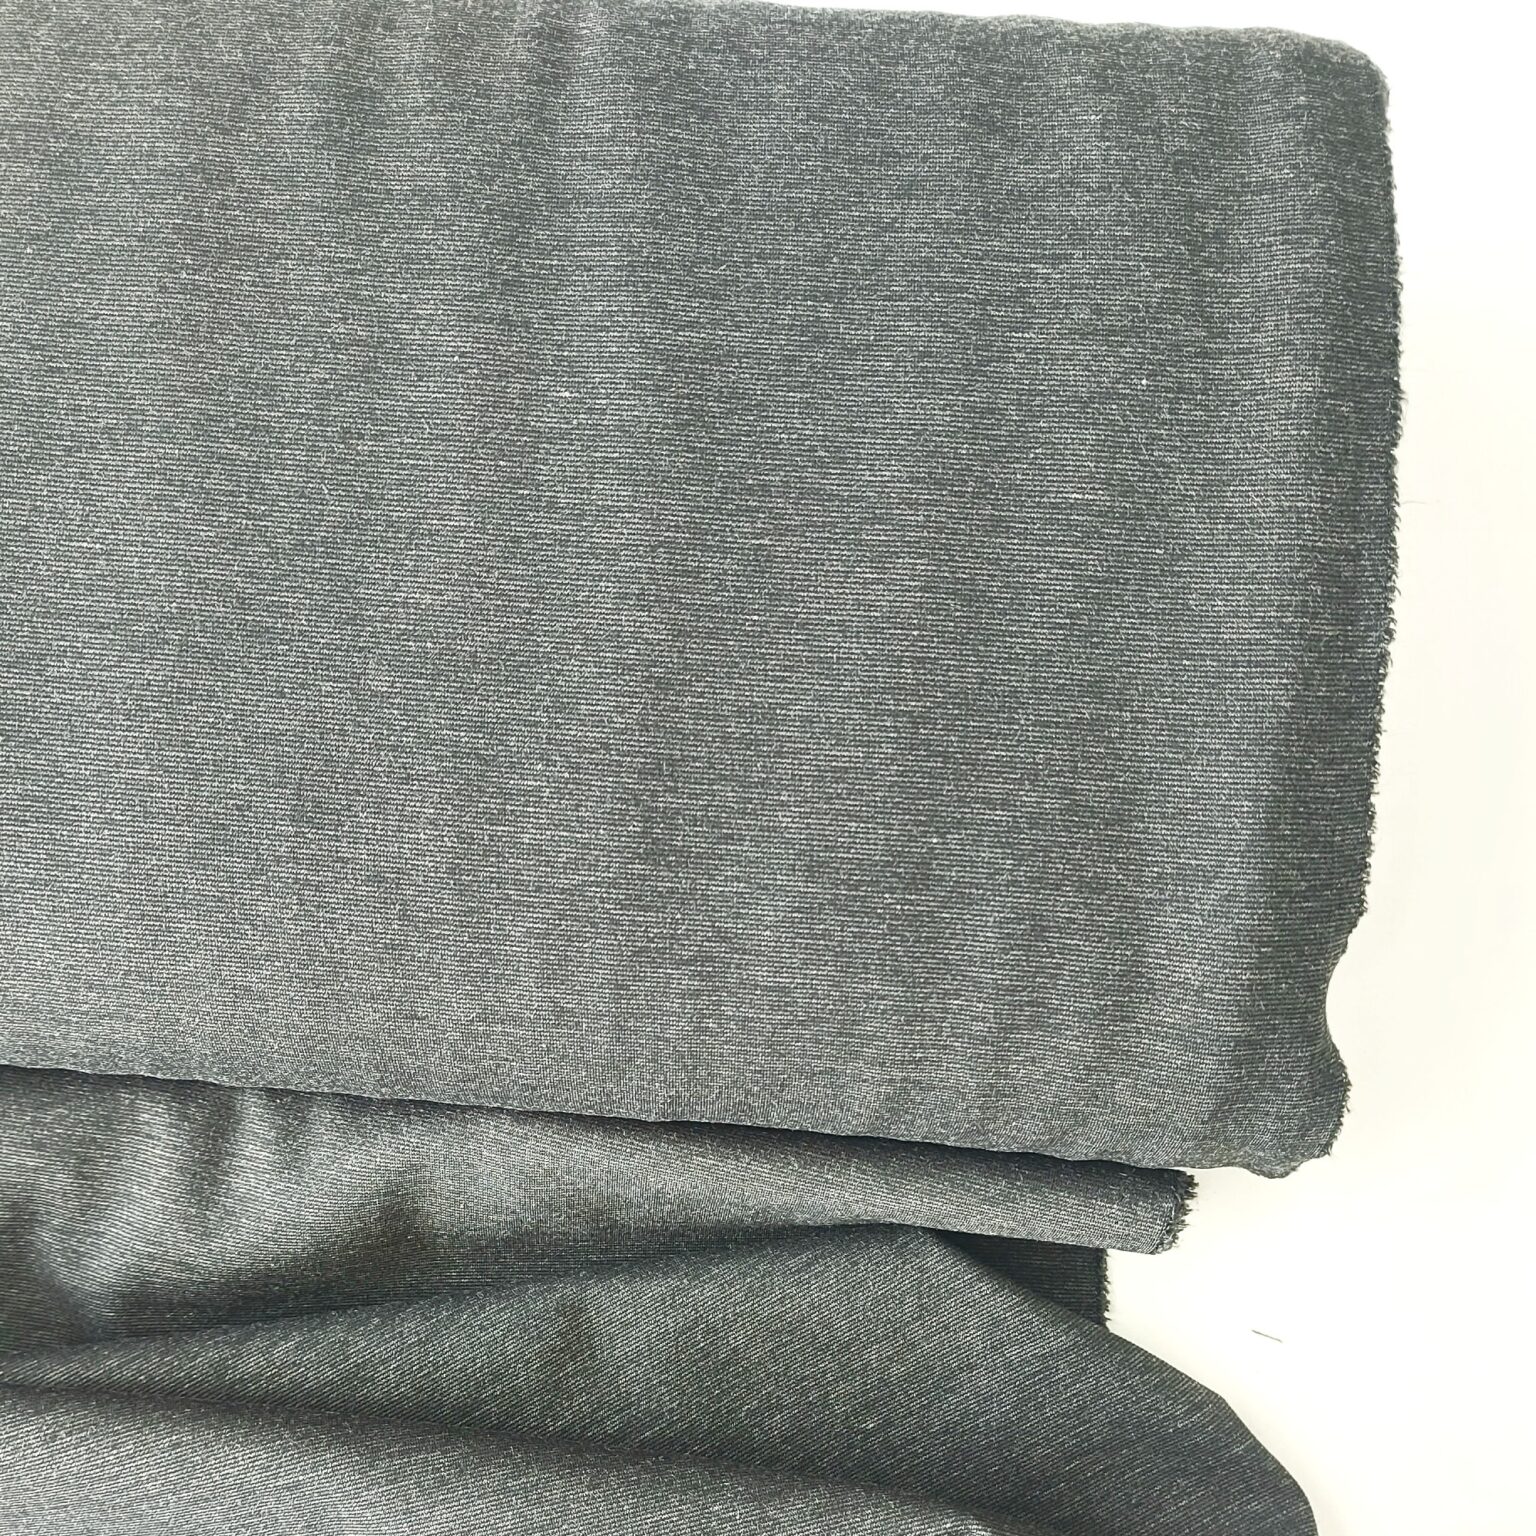 charcoal grey ponteroma fabric | More Sewing